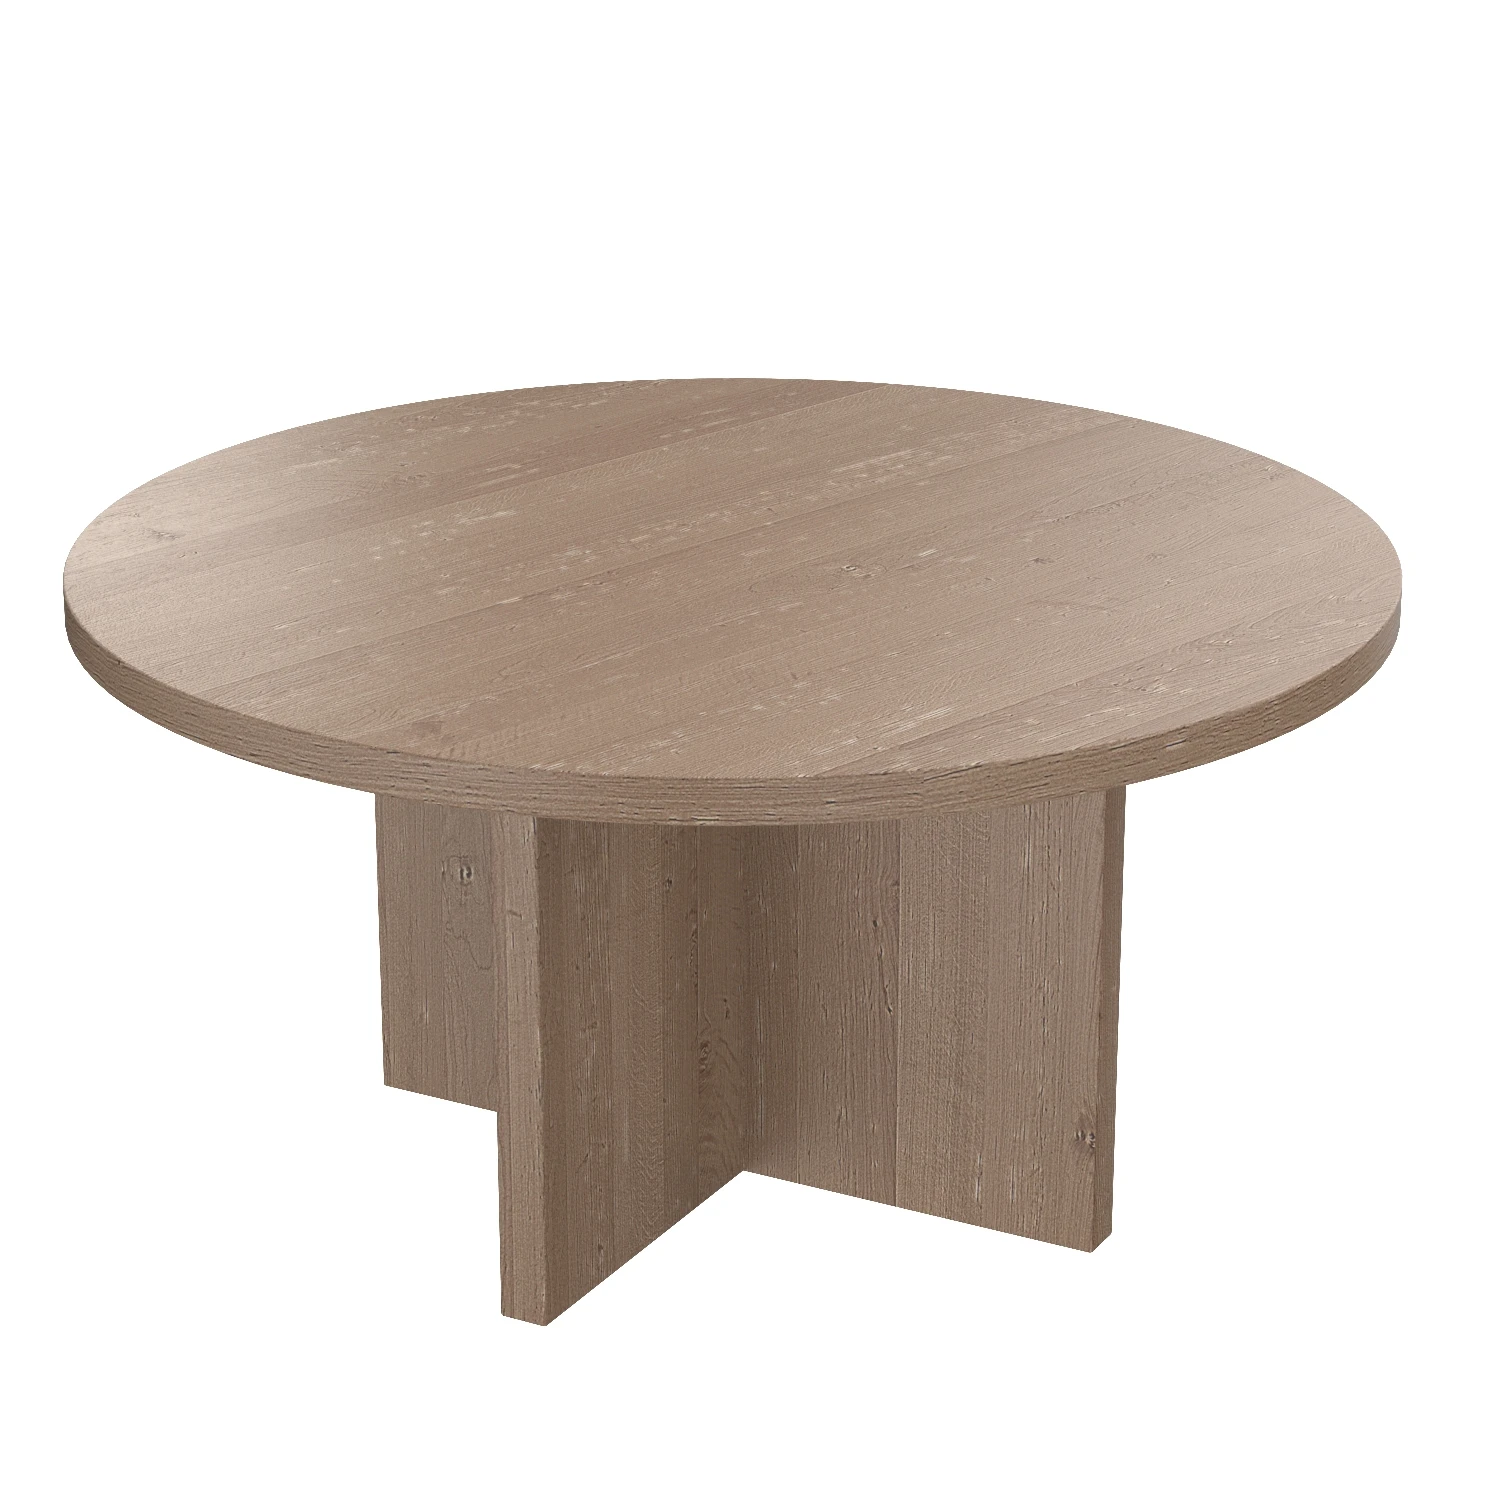 Harley Round Dining Table 3D Model_06